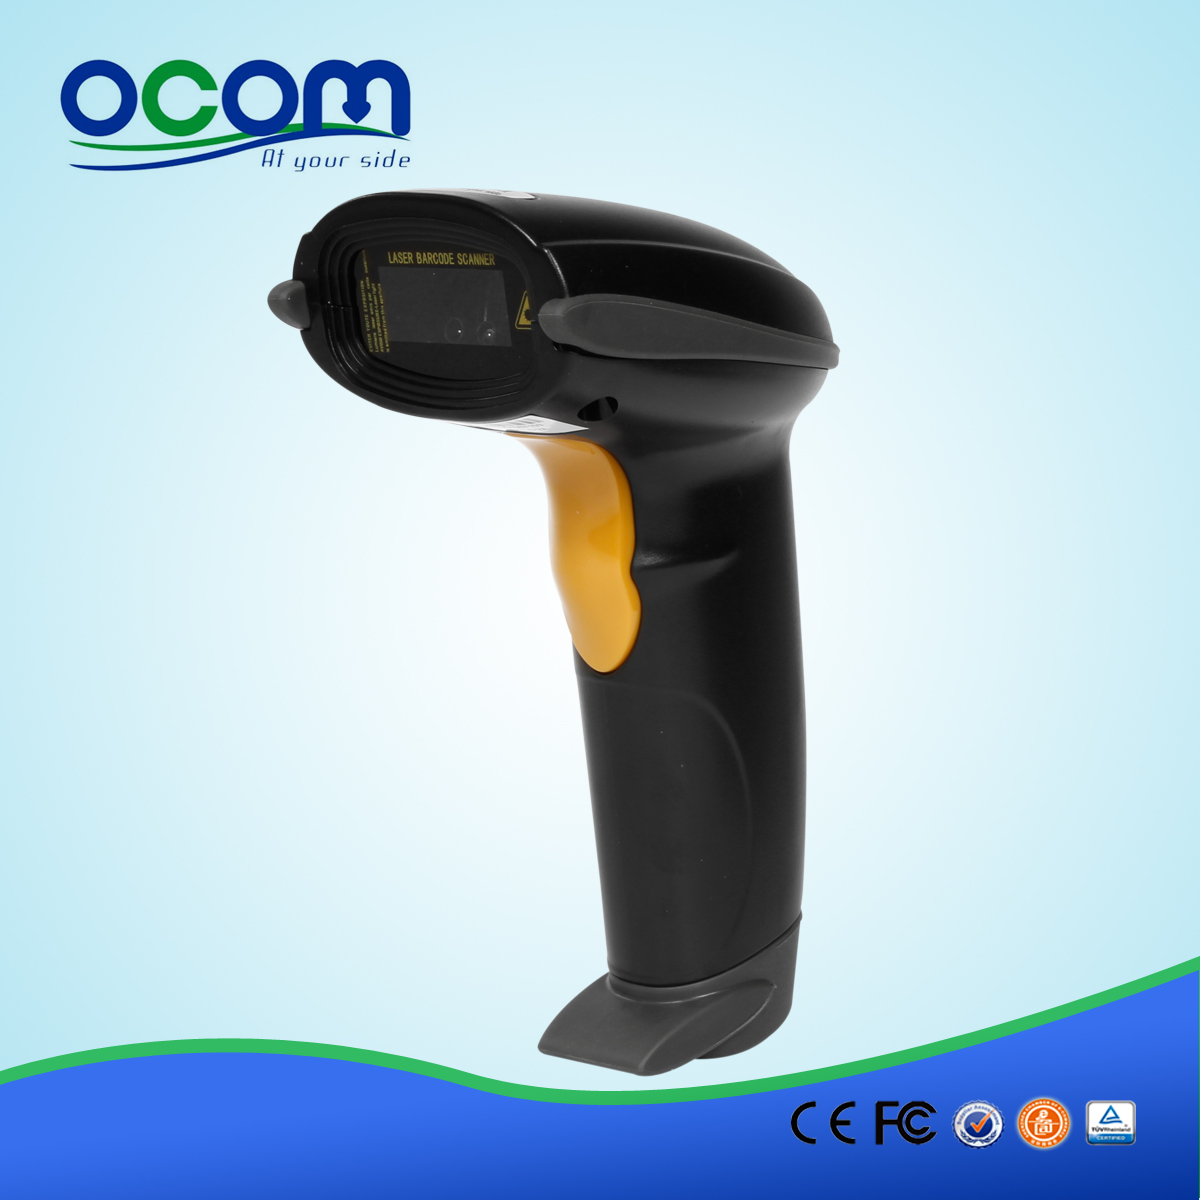 1D automatic waybill barcode scanner with stand